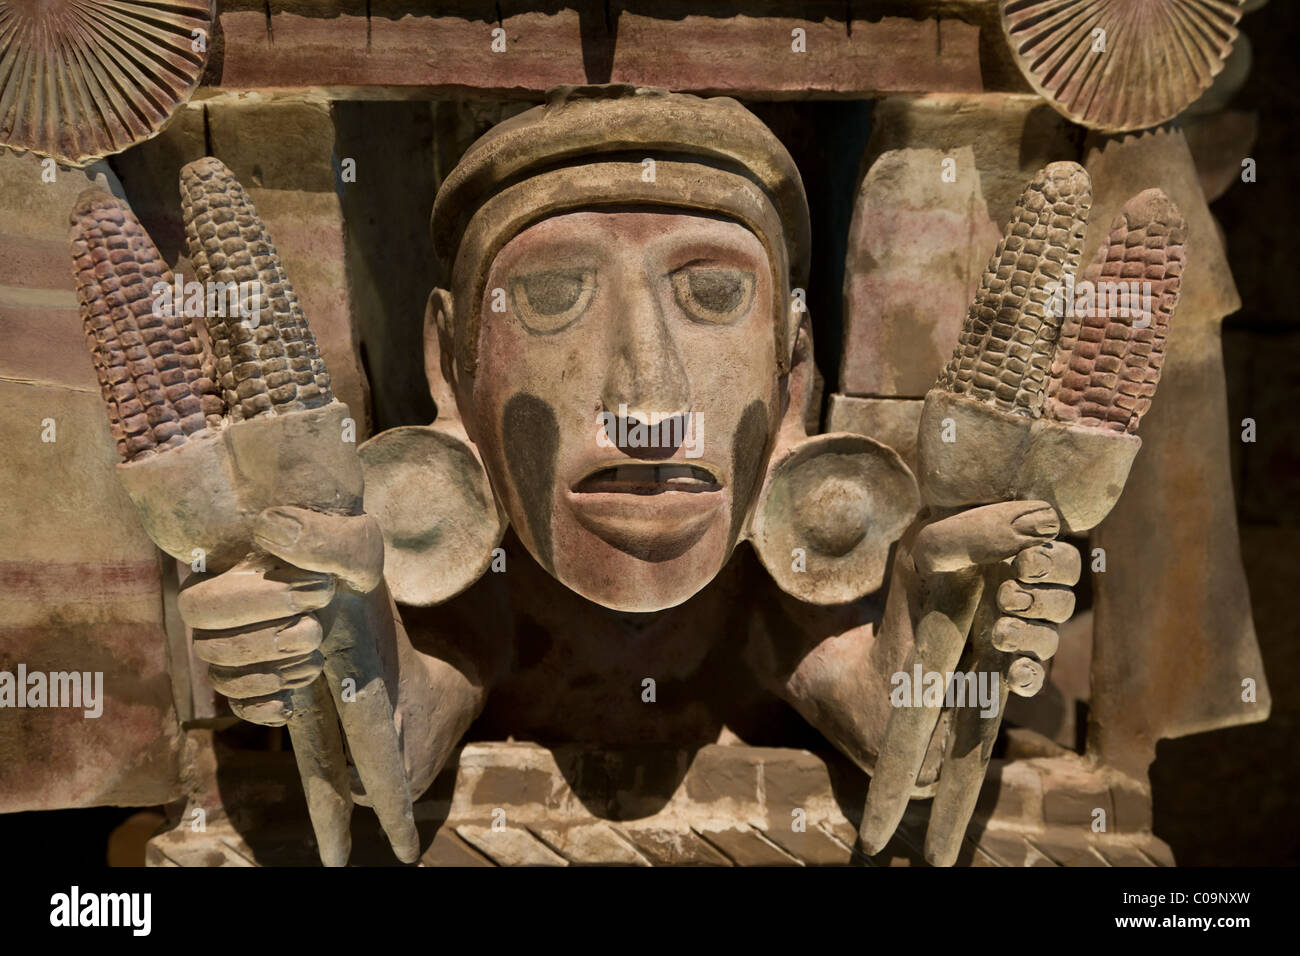 Statue of Mexica or Aztec corn goddess Chicomecoatl patron of agriculture in the National Museum of Anthropology in Mexico City. Stock Photo